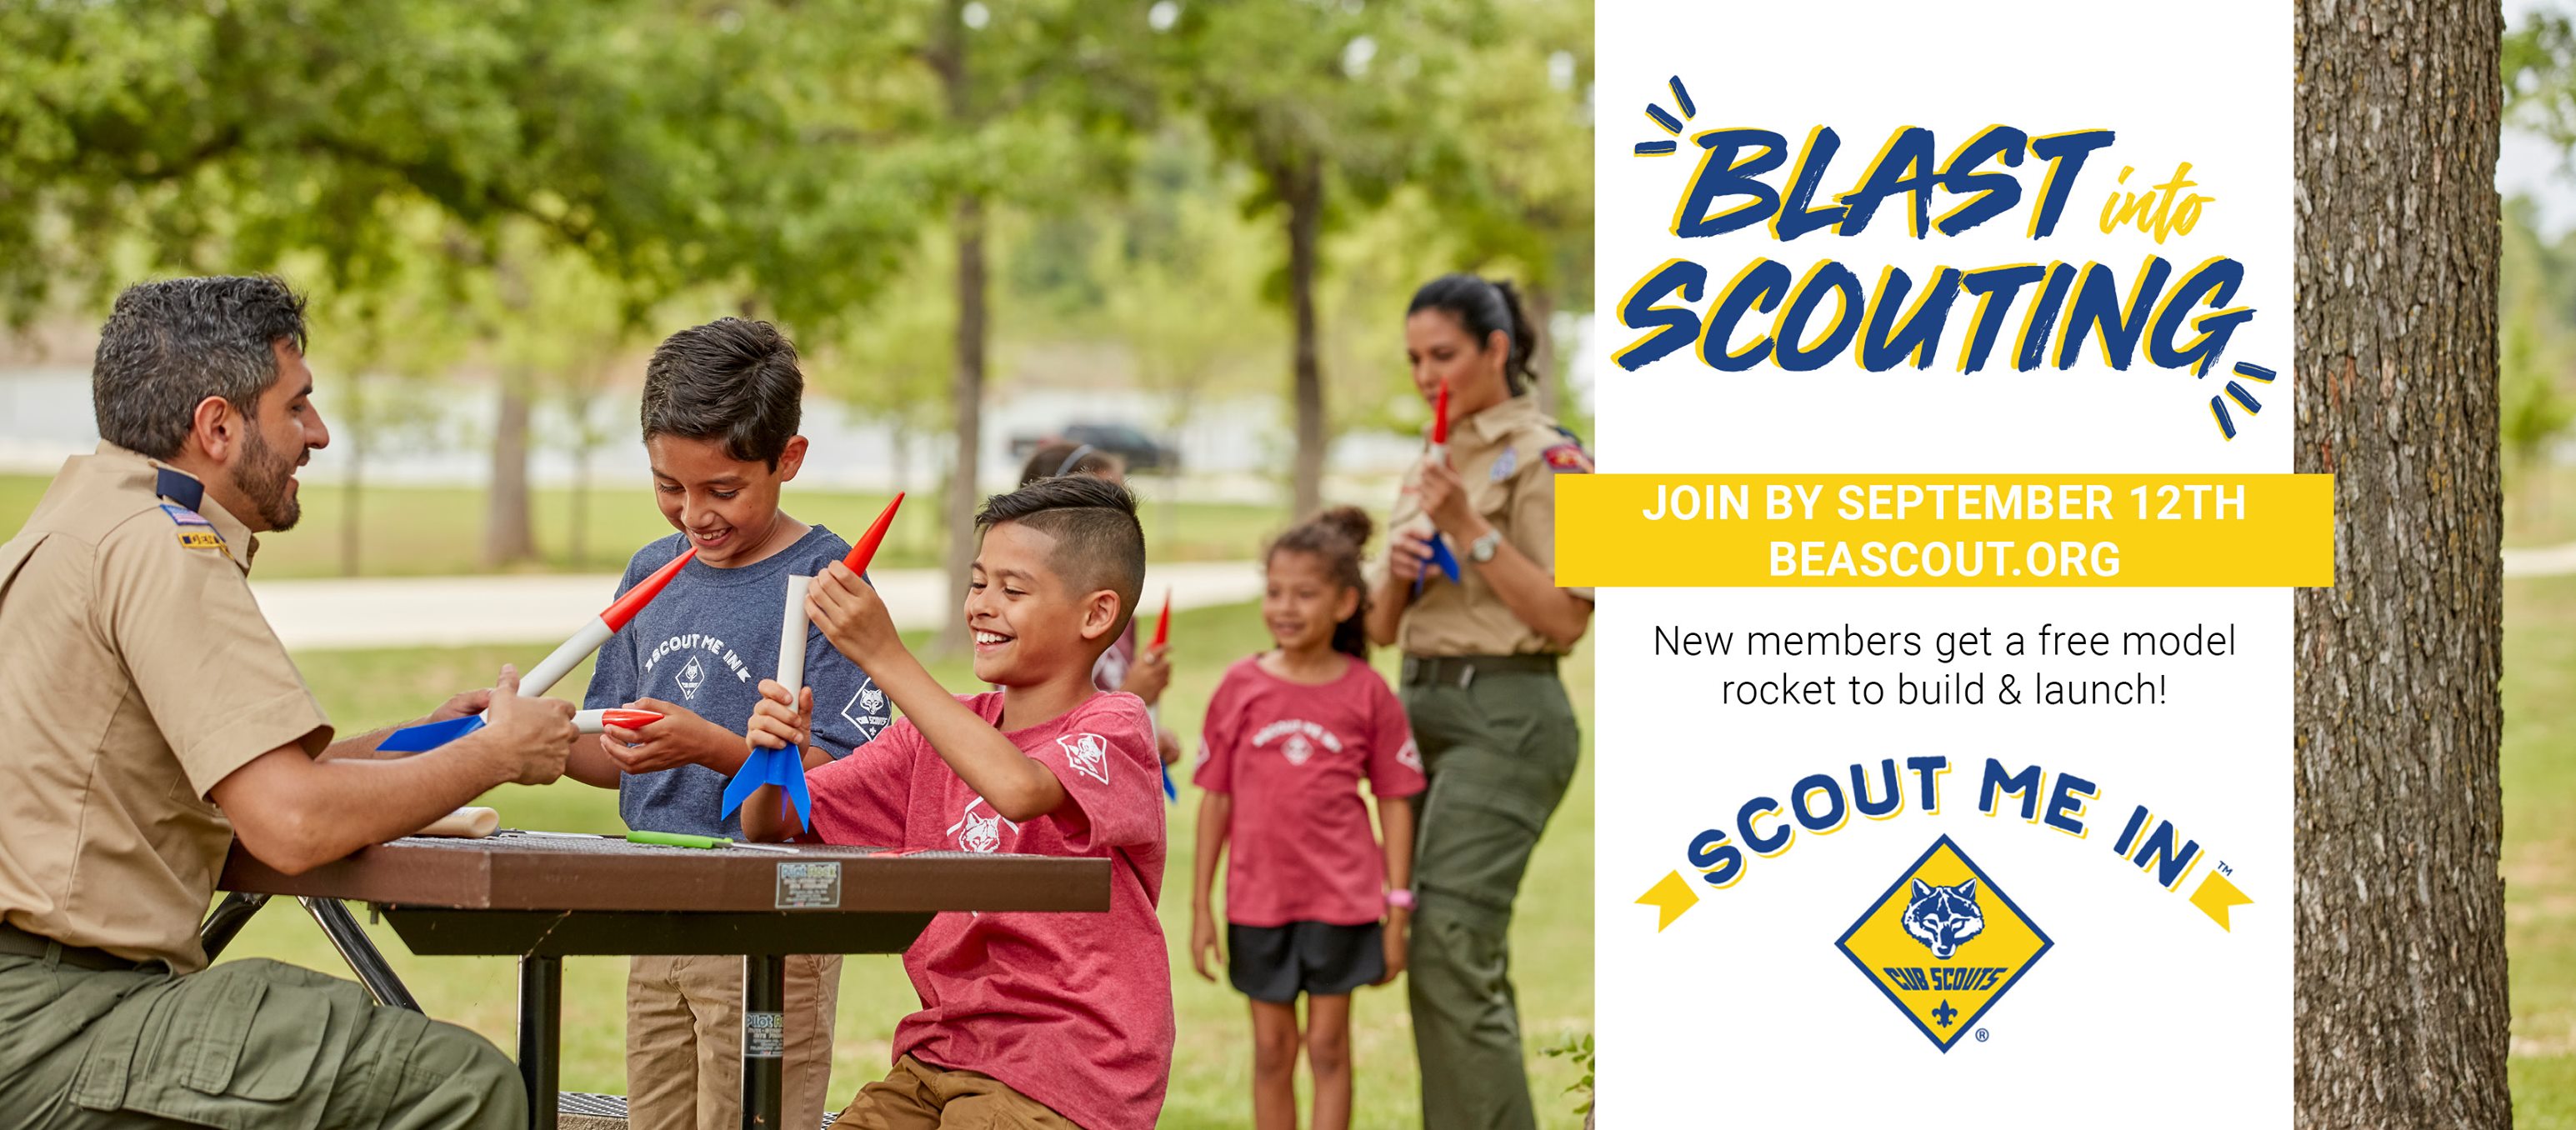 Blast into Scouting!